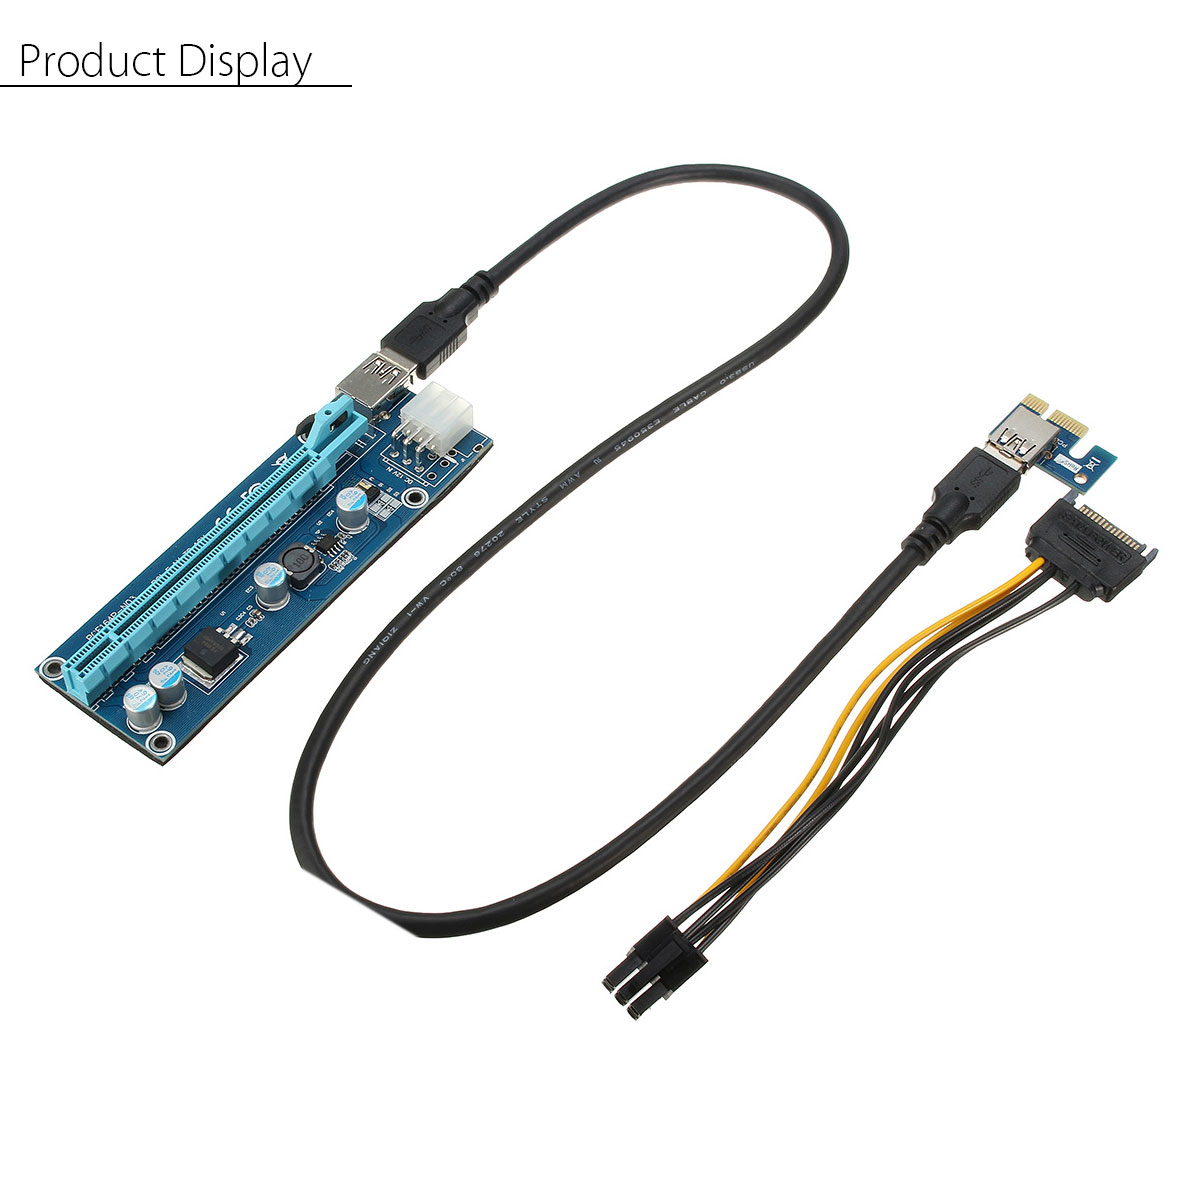 USB-30-PCI-E-Express-1x-To-16x-Extender-Riser-Card-Adapter-Power-Cable-Mining-1173209